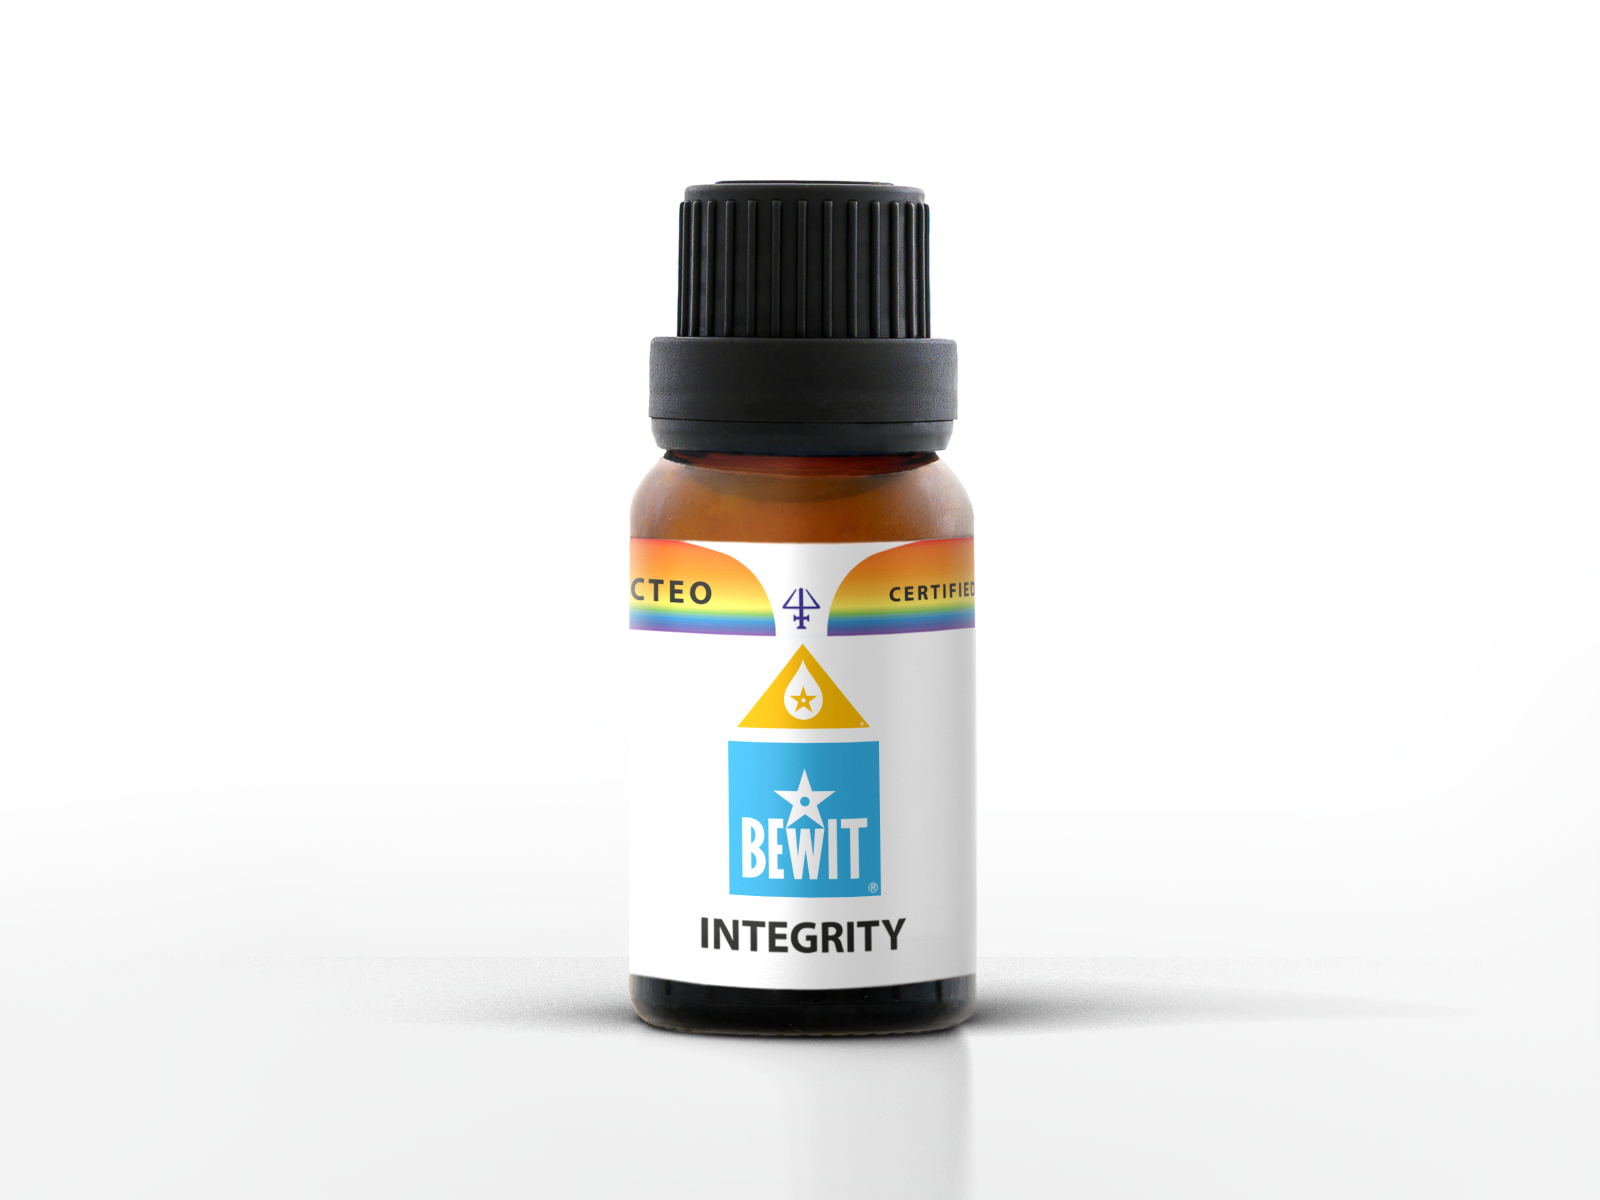 BEWIT INTEGRITY - Blend of essential oils